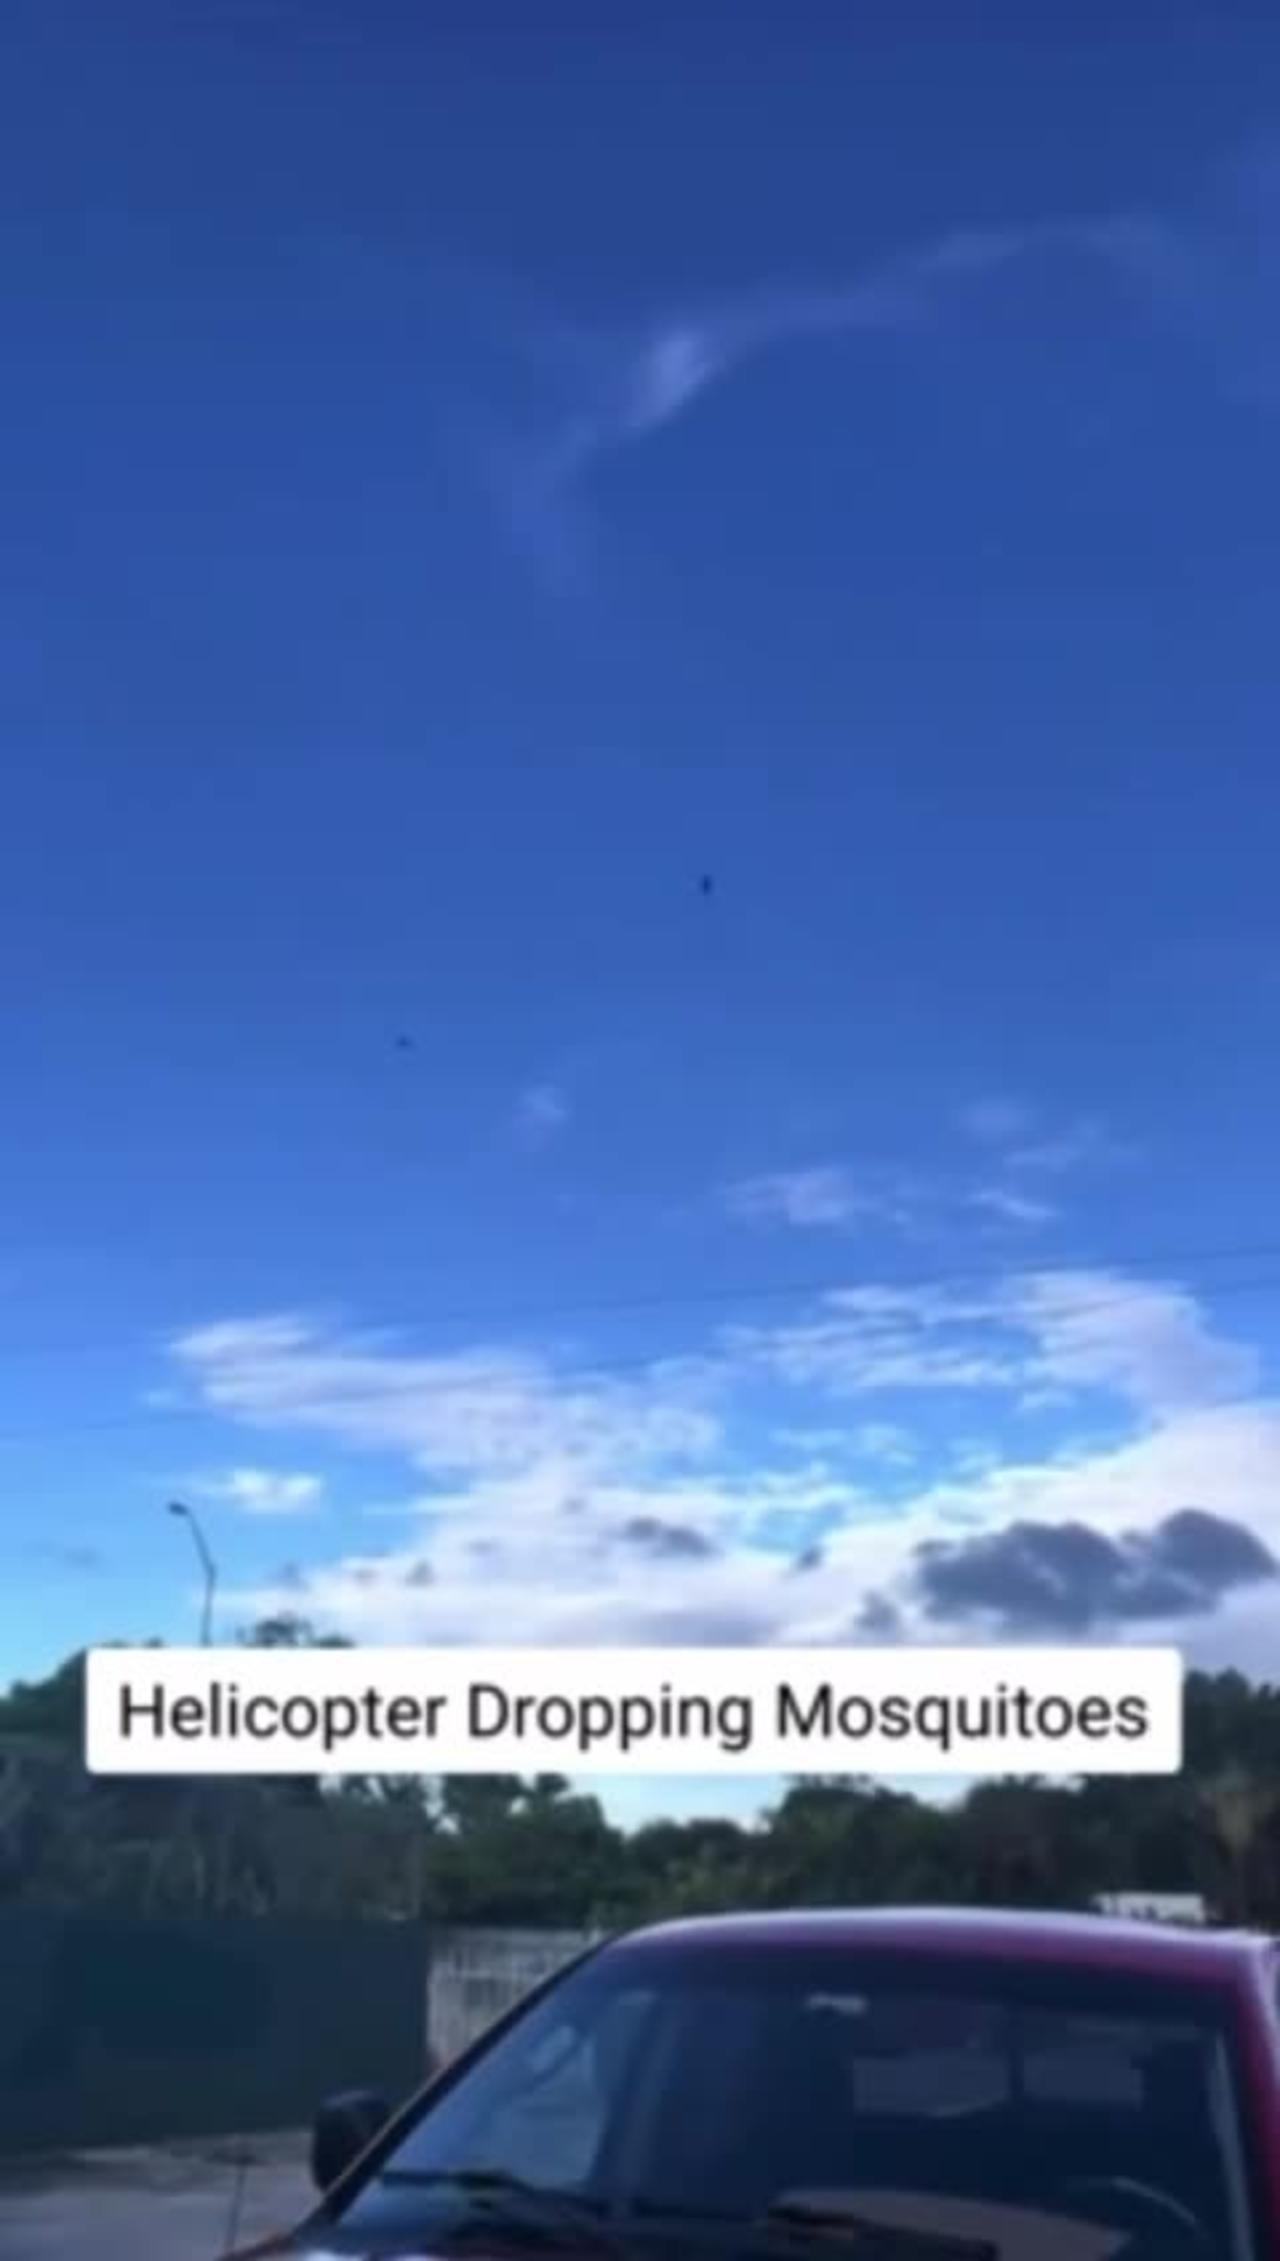 Helo dropping engineered mosquitos carrying malaria